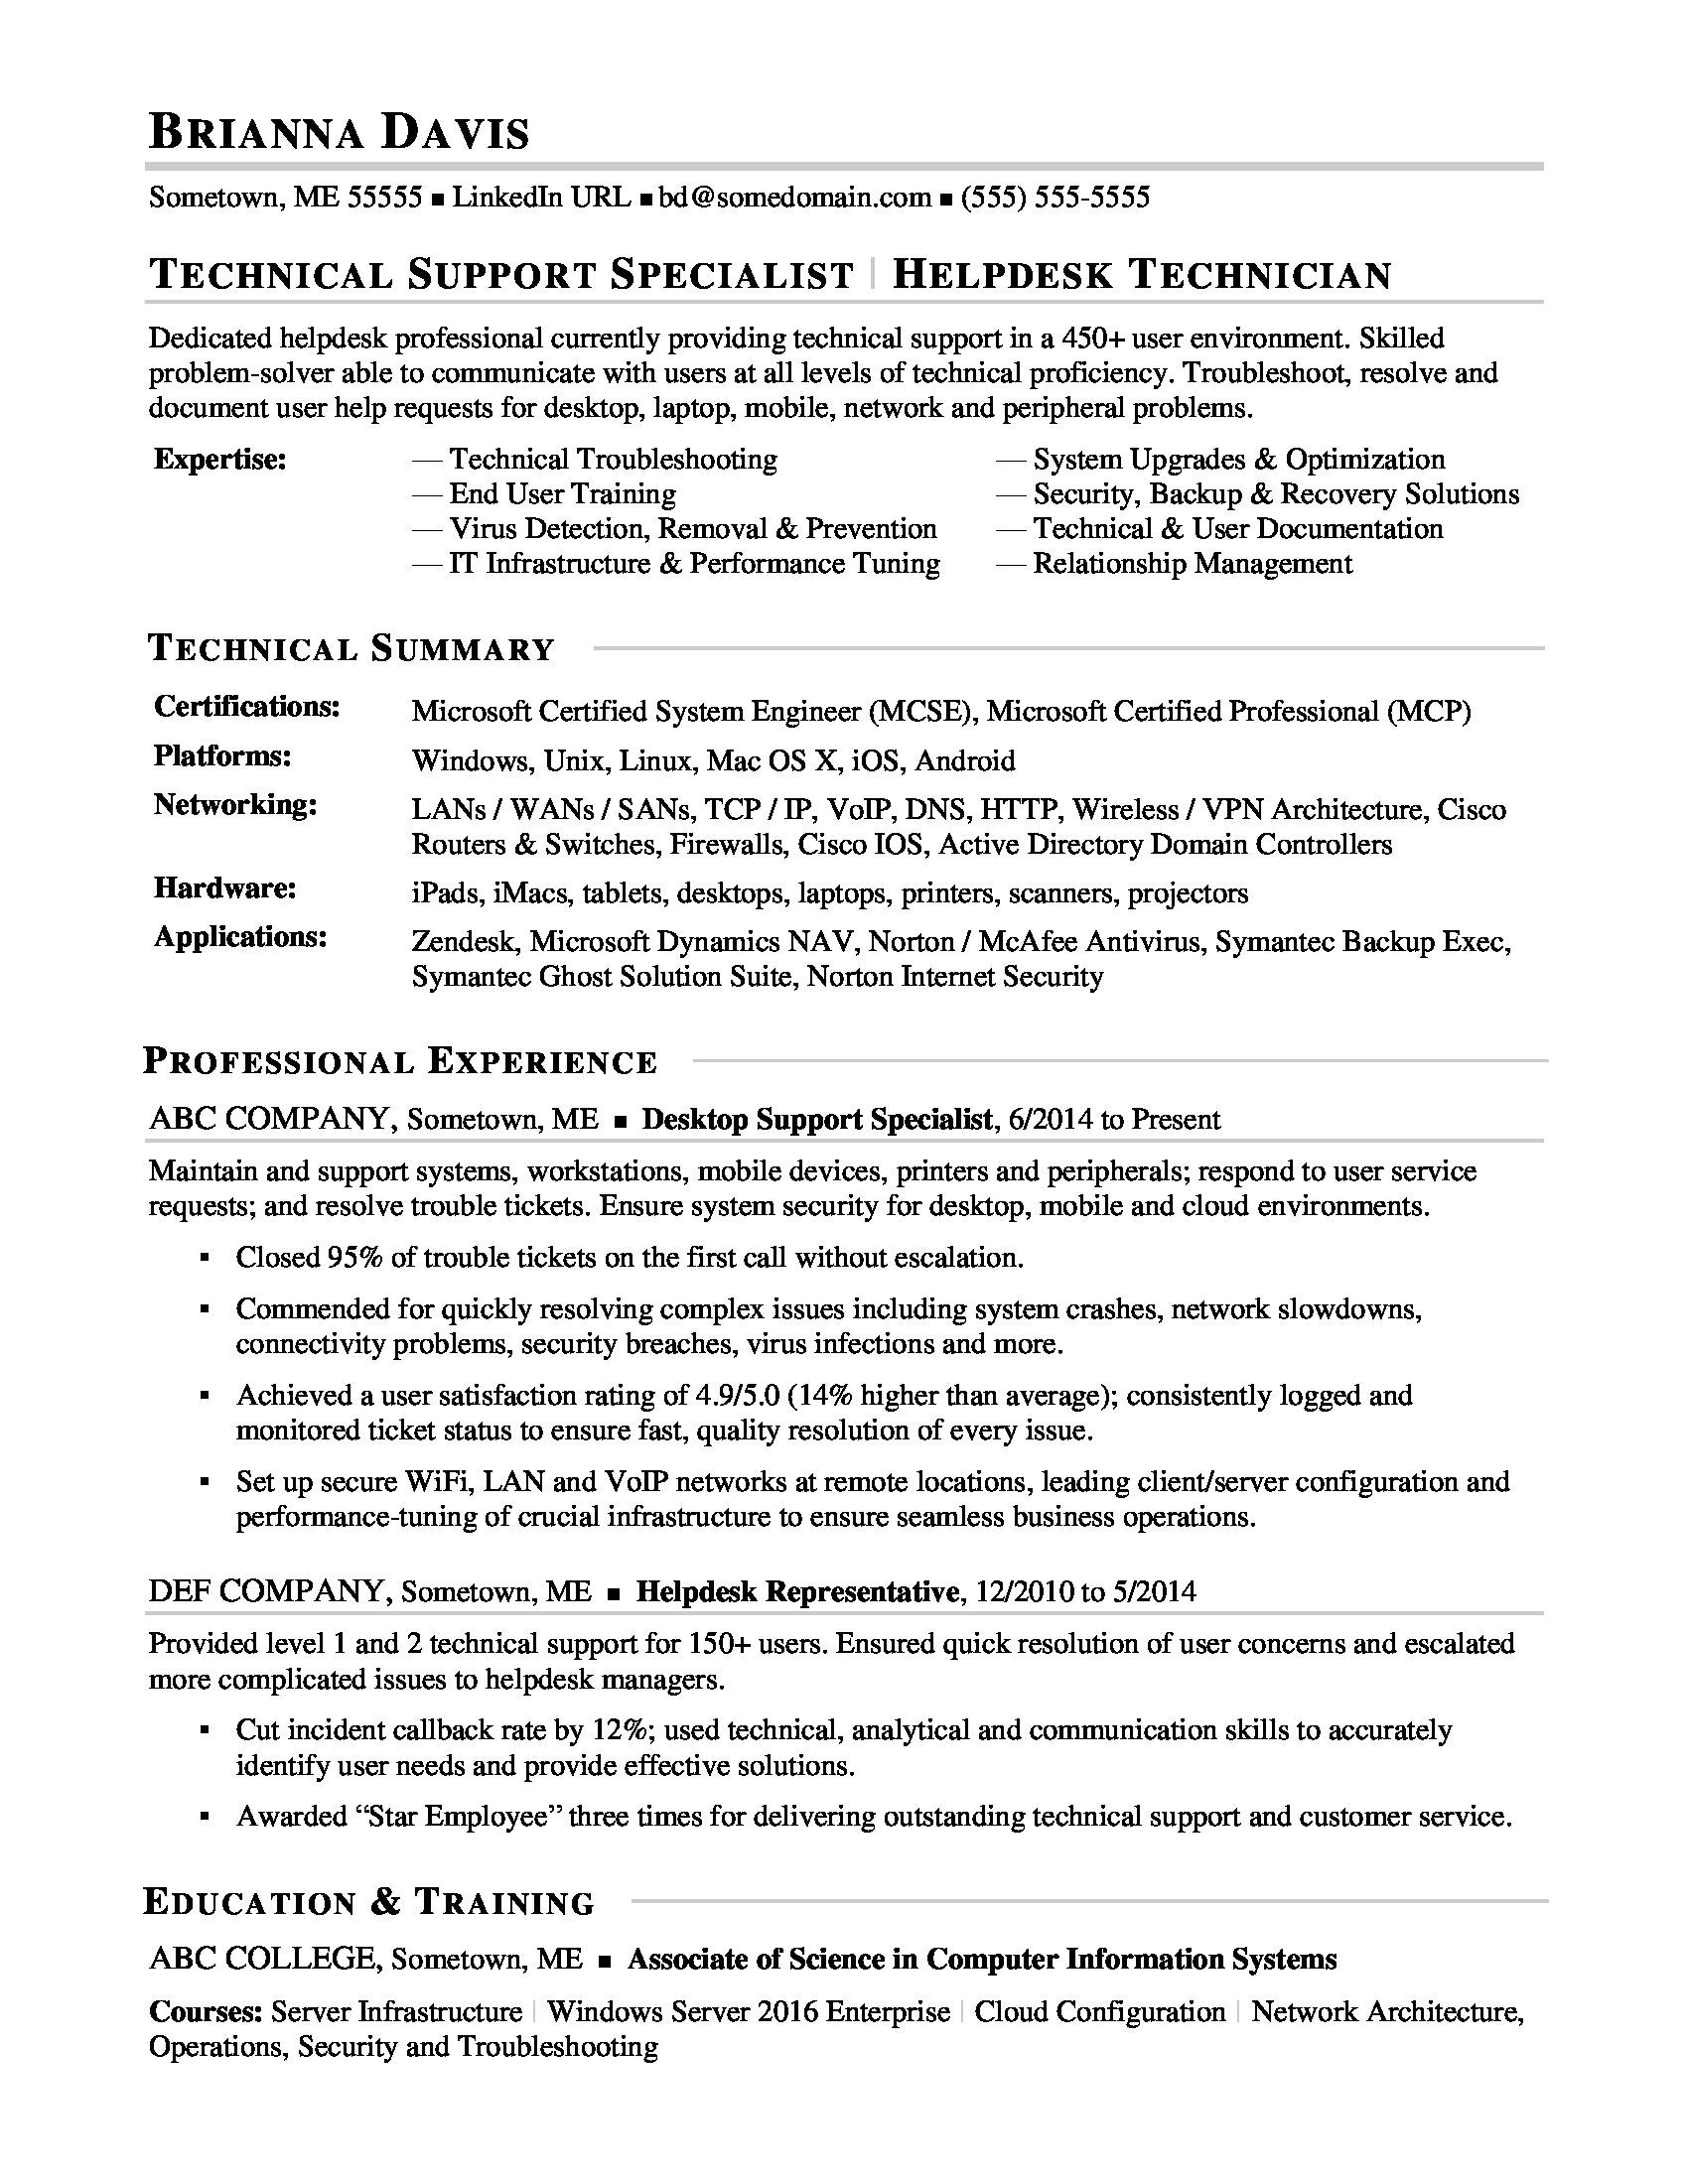 Lead It Support Analyst Resume Samples Sample Resume for Experienced It Help Desk Employee Monster.com